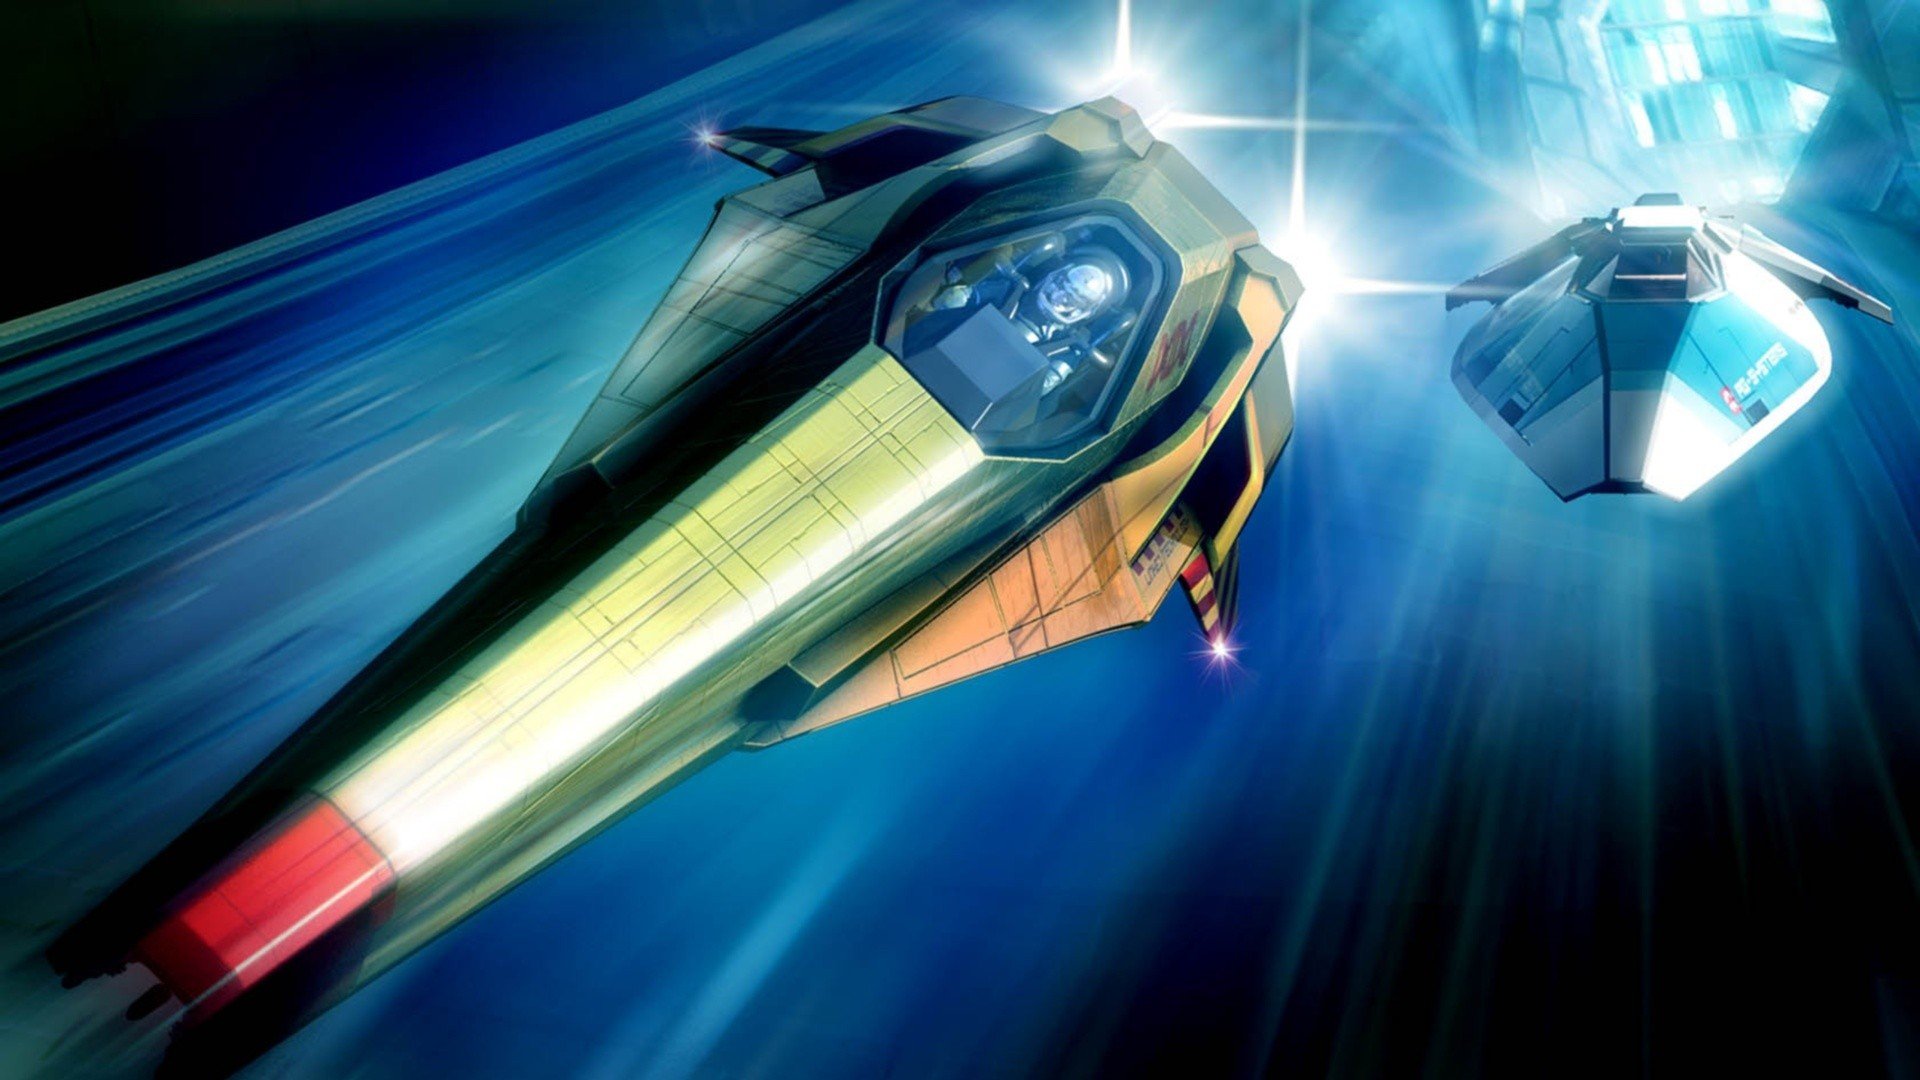 outer, Space, Wipeout, Spaceships, Speed Wallpaper